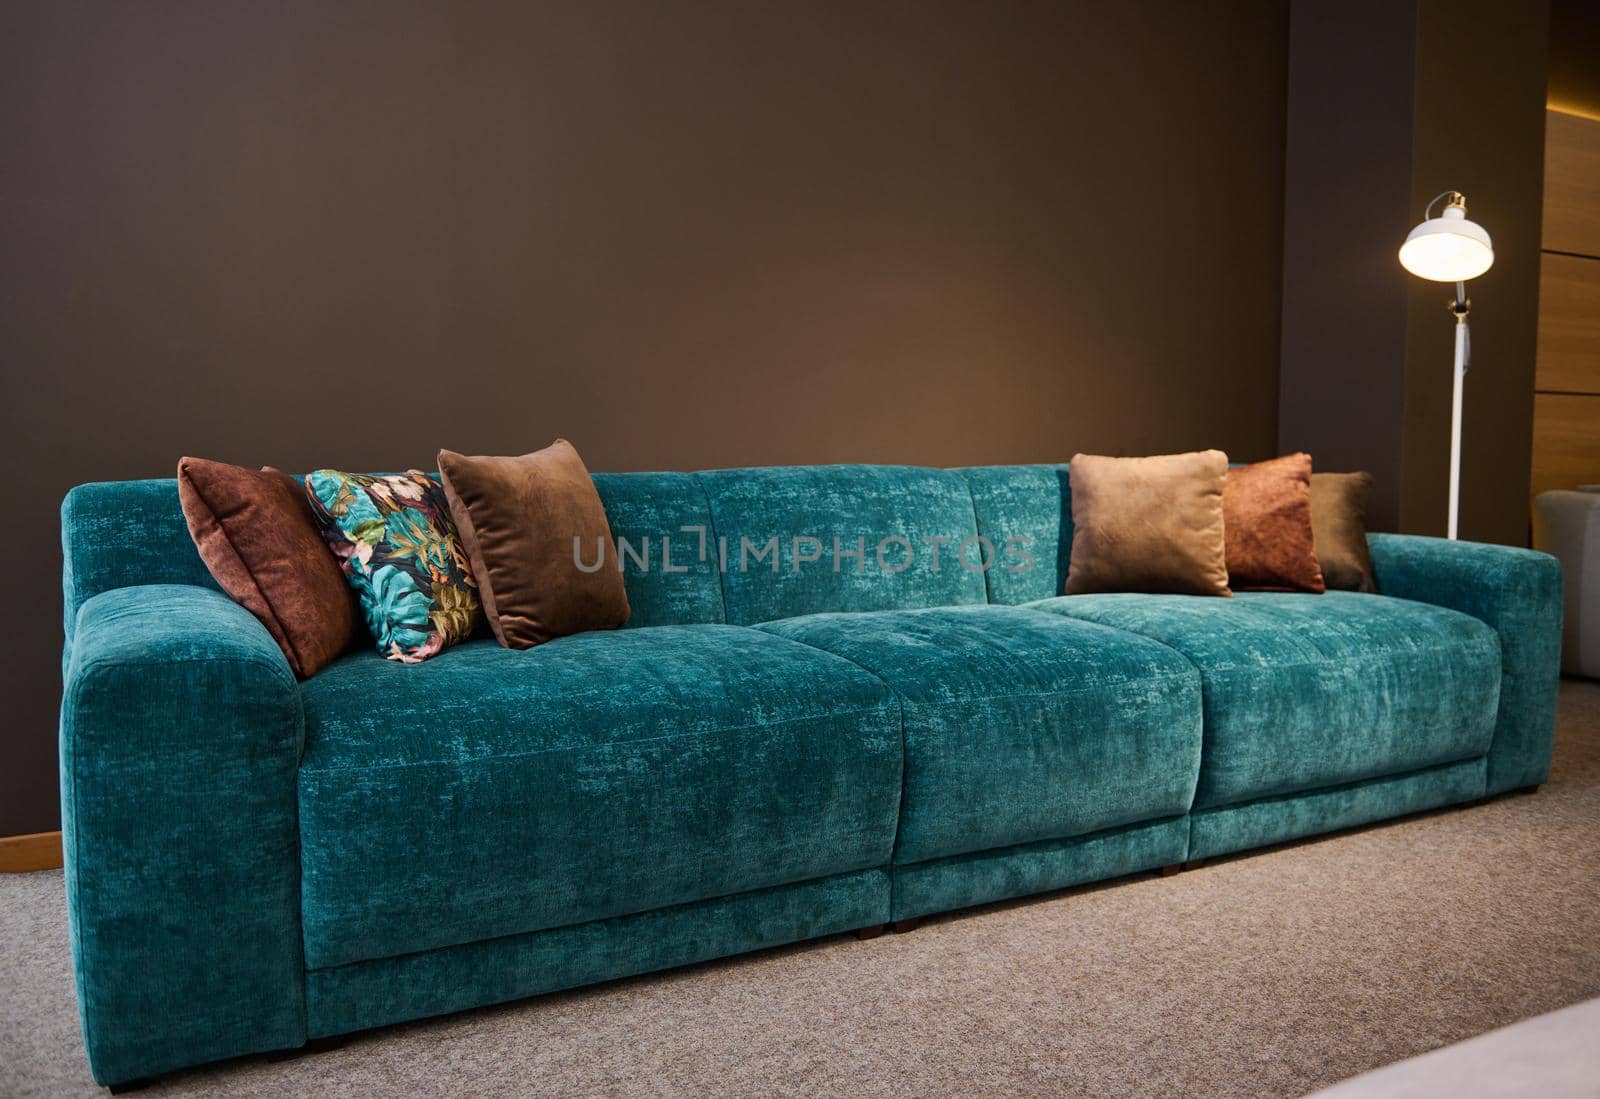 Exhibition of modern stylish upholstered furniture in the showroom of a furniture store. Focus on a turquoise soft velour sofa and brown pillows lit by a lamp against a brown wall background by artgf